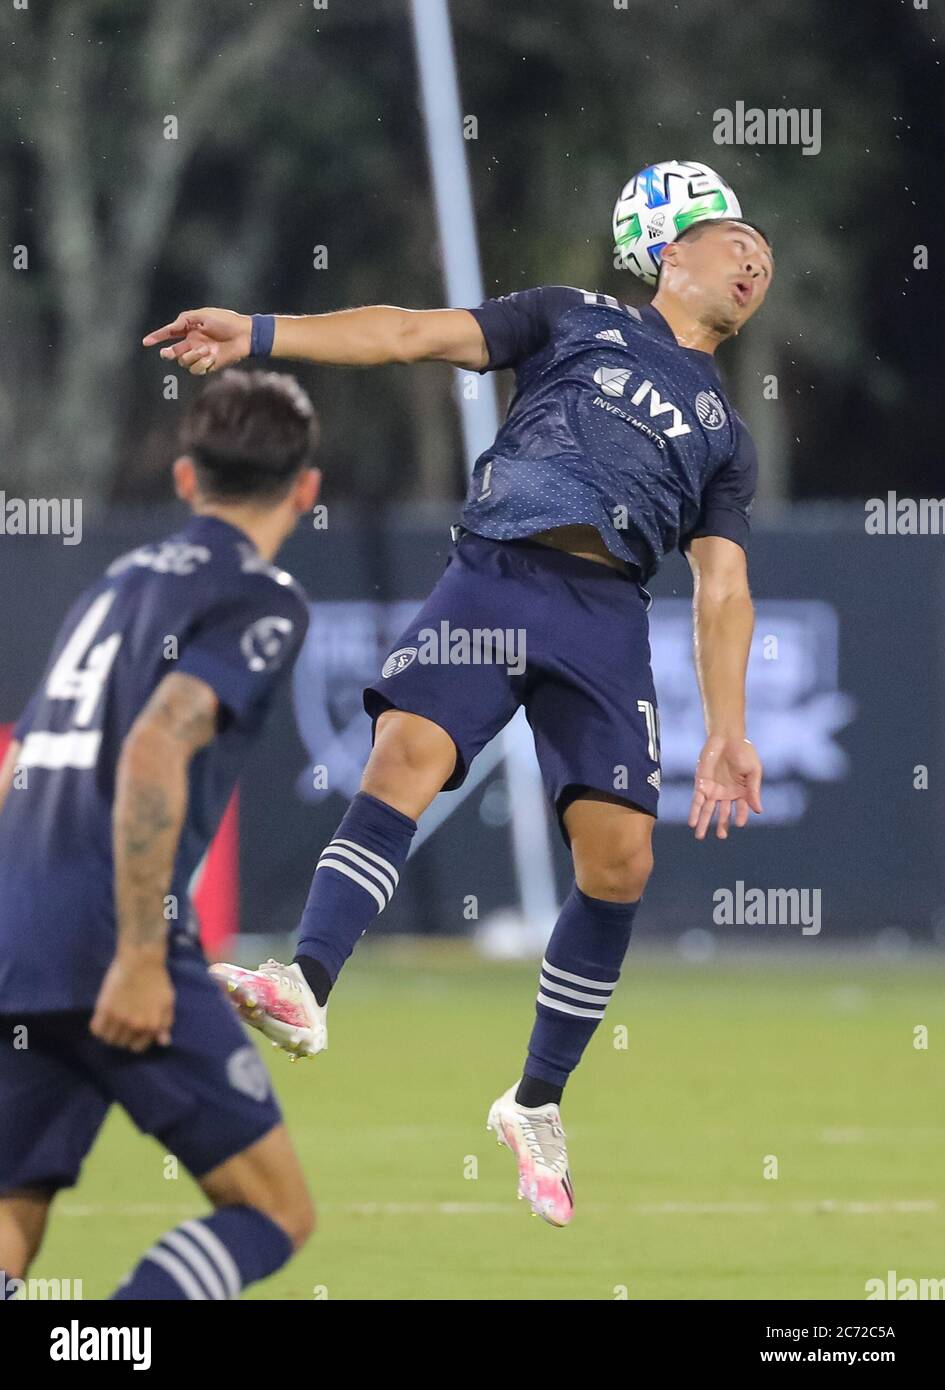 July 12, 2020: Sporting Kansas City midfielder ROGER ESPINOZA (15) gets a header during the MLS is Back Tournament Sporting Kansas City vs Minnesota match at ESPN Wide World of Sports Complex in Orlando, Fl on July 12, 2020. Credit: Cory Knowlton/ZUMA Wire/Alamy Live News Stock Photo